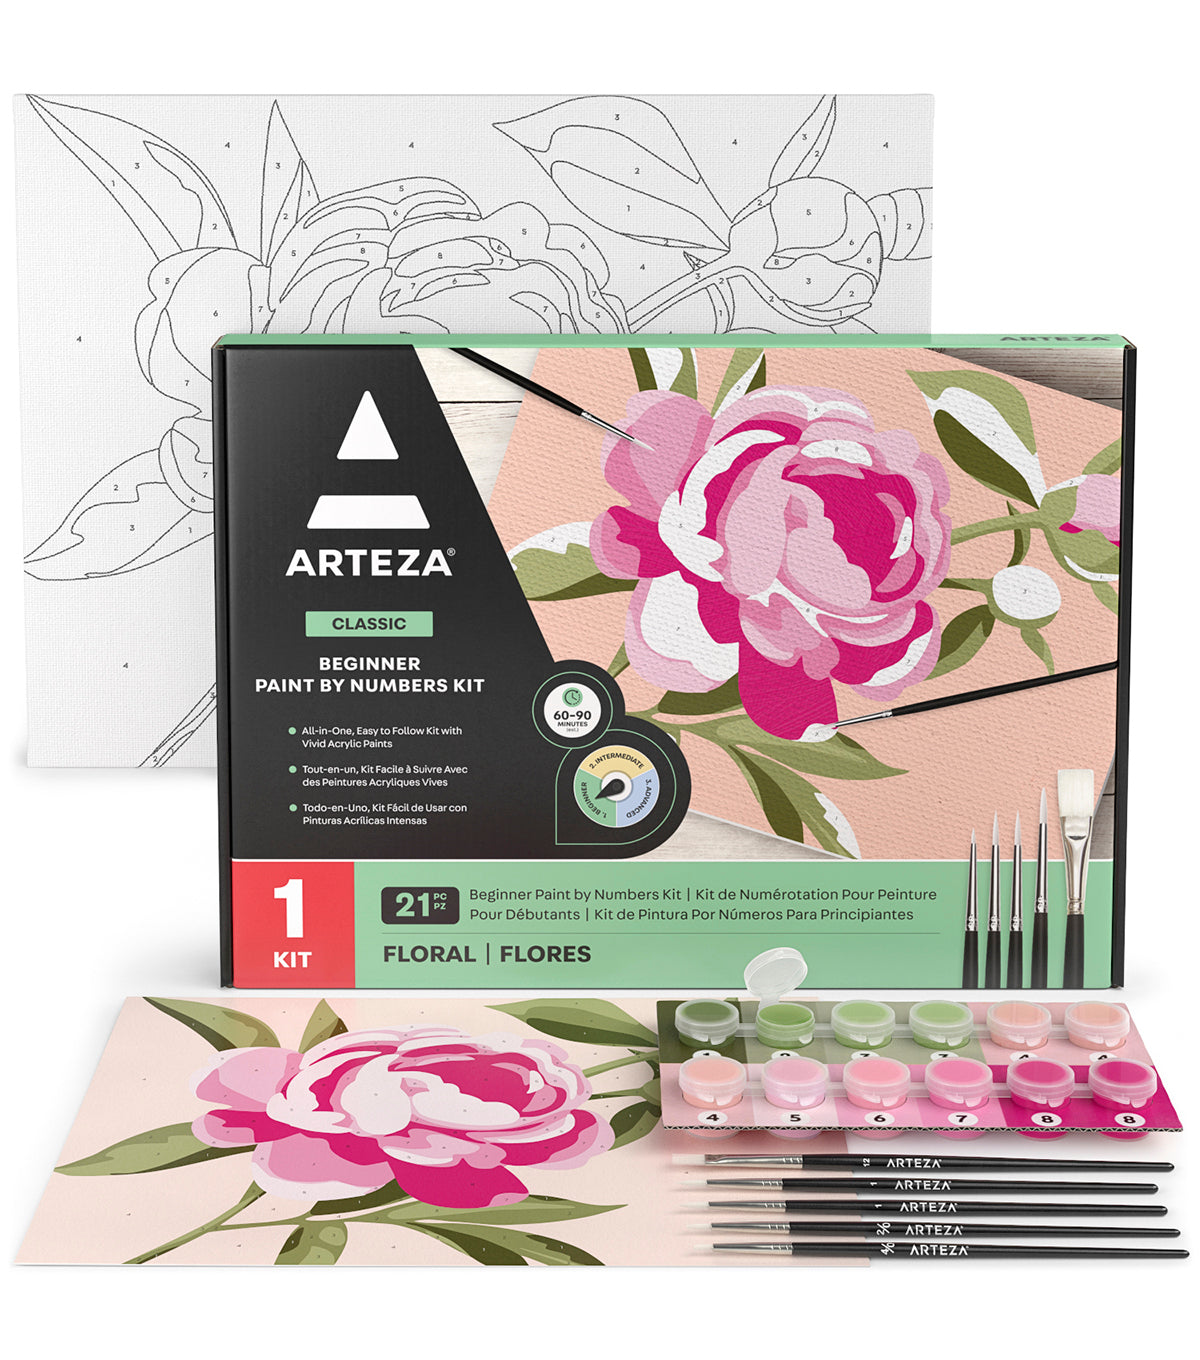 Arteza Kids Paint by Numbers Kit 10 x 10 Inches Pre-Printed Fairytale Canvas  Painting Kit with 2 Canvases 24 Acrylic Paint Pots 3 Paintbrushes Art  Supplies for Developing Hand-Eye Coordination Frog